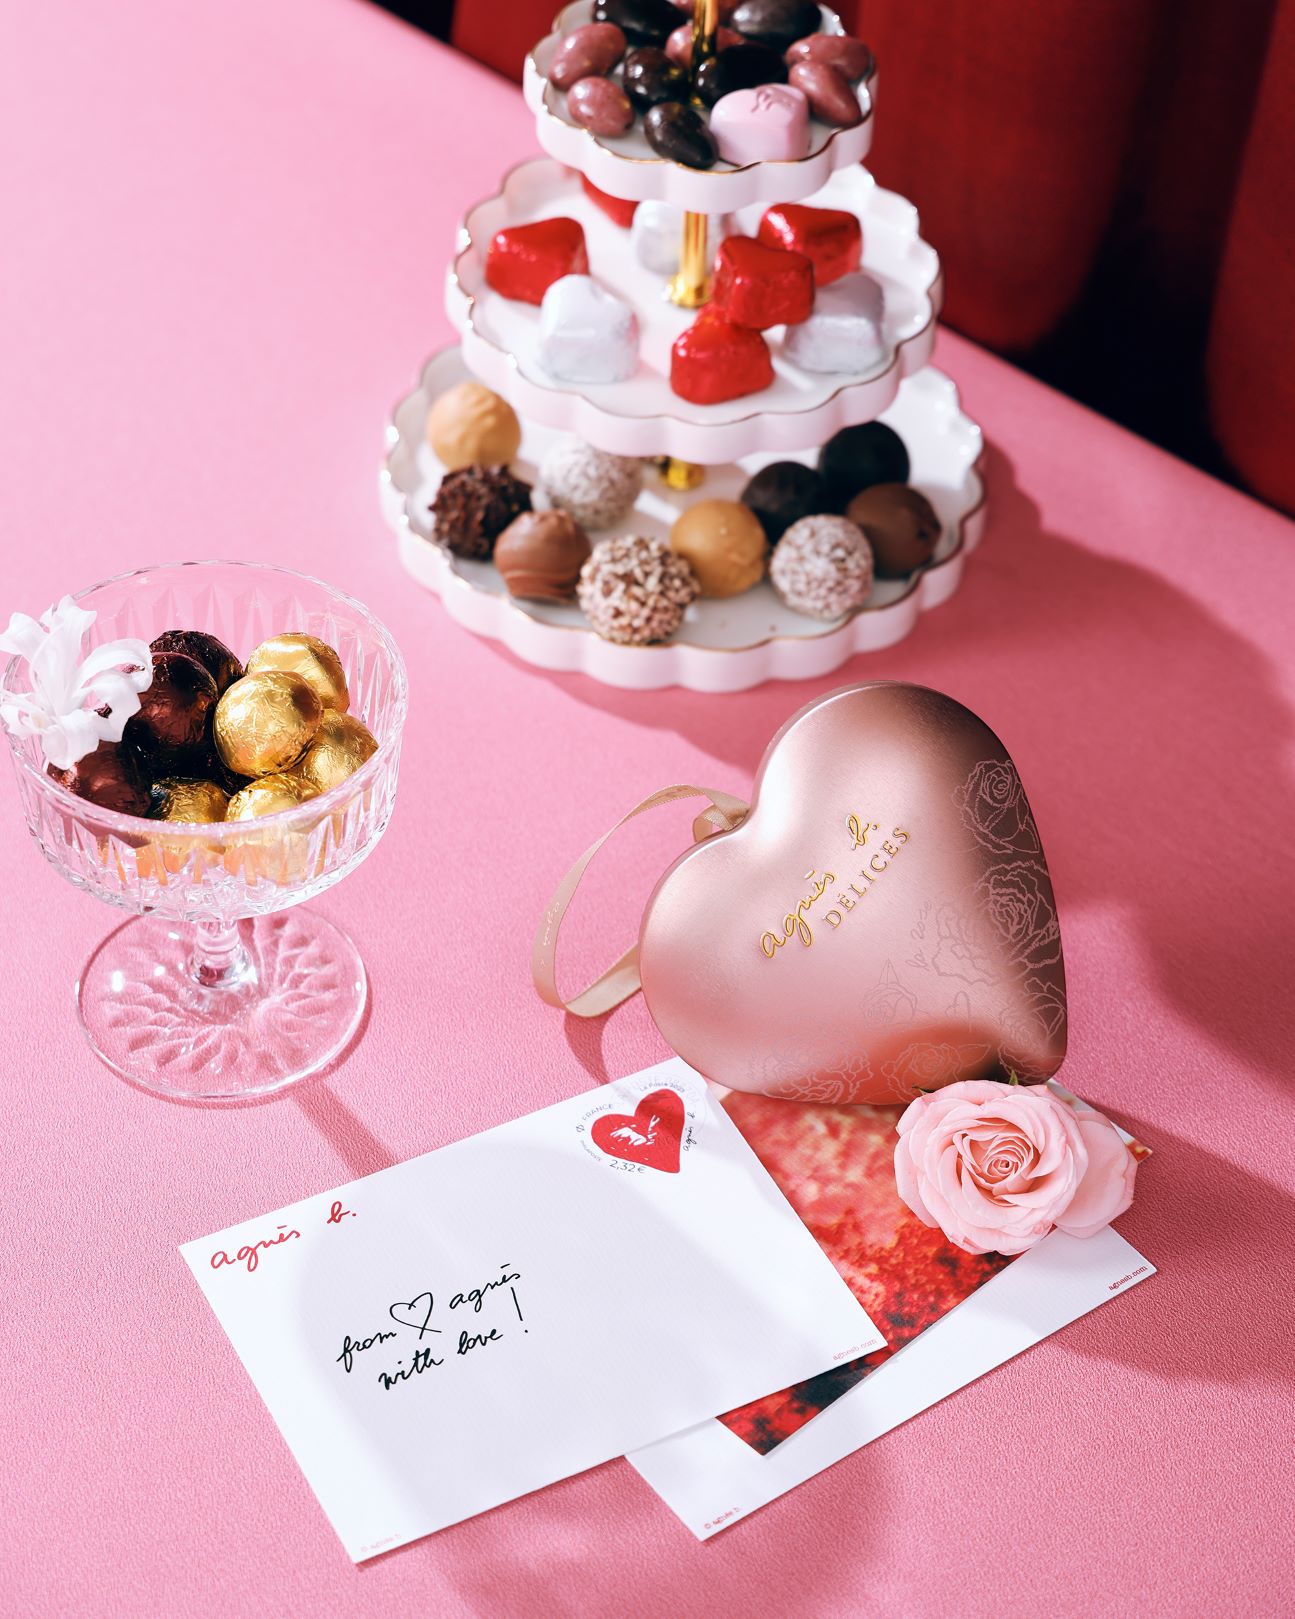 Romantic. Roses, bear, chocolate, wine & champagne. Louis Vuitton gifts.  Rose pebbles. Valentine's Day.